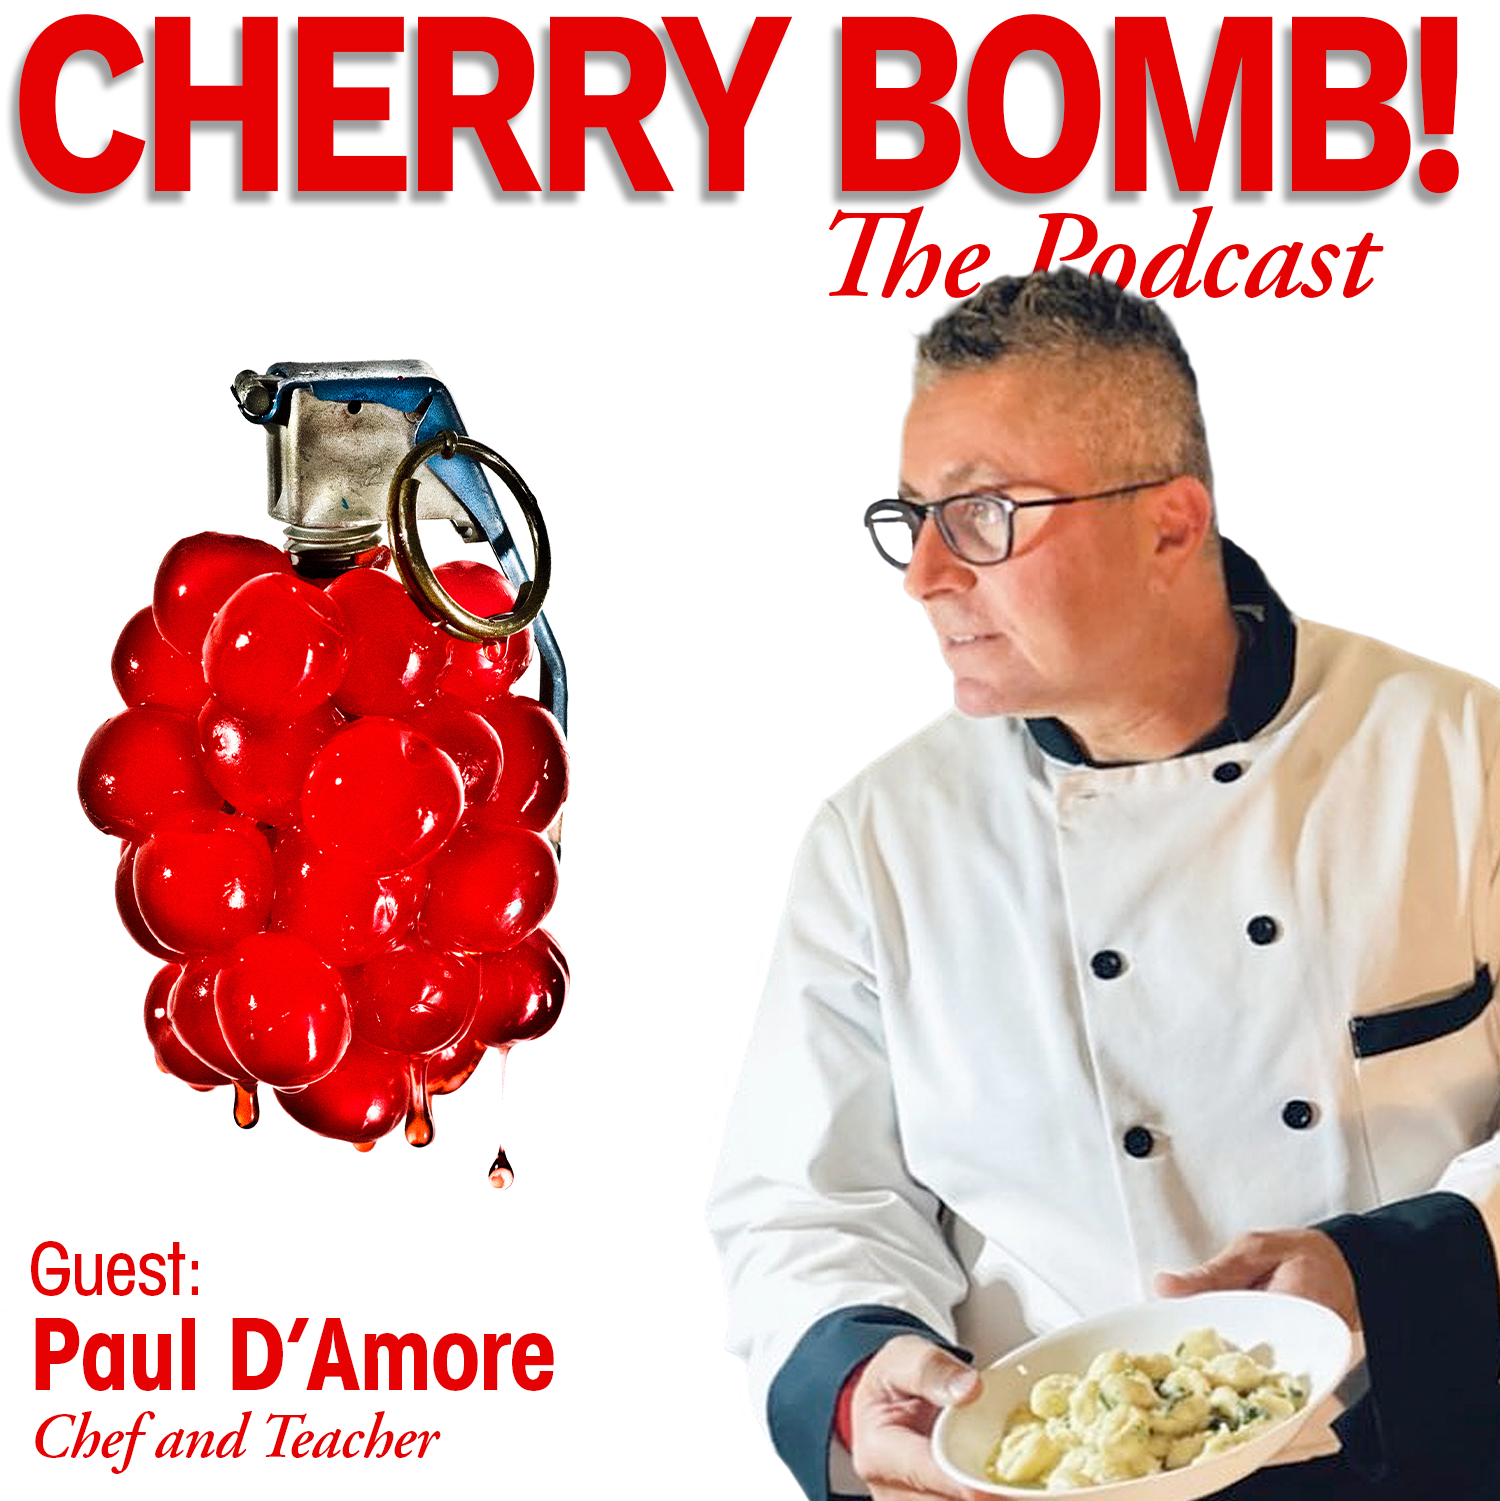 Chef Paul D'Amore on Cherry Bomb! The Podcast